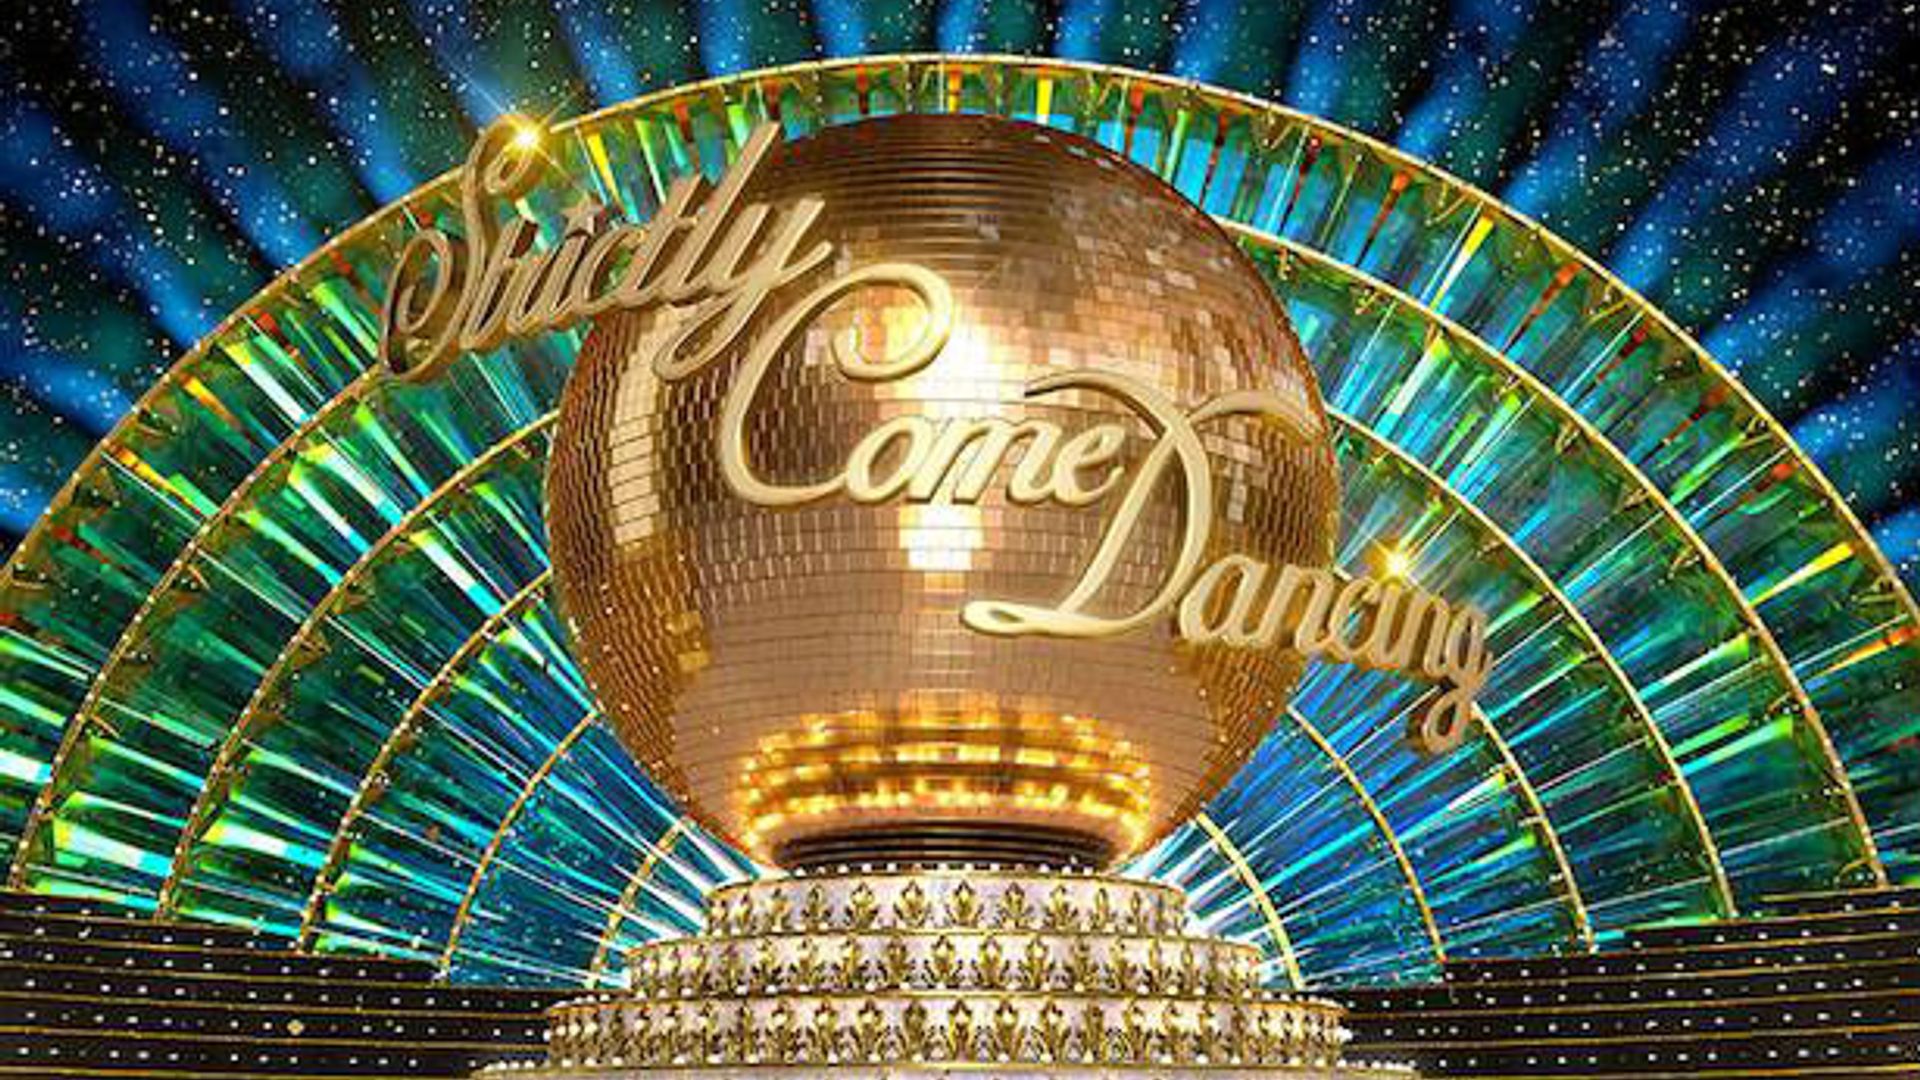 Strictly Come Dancing welcomes back these former stars